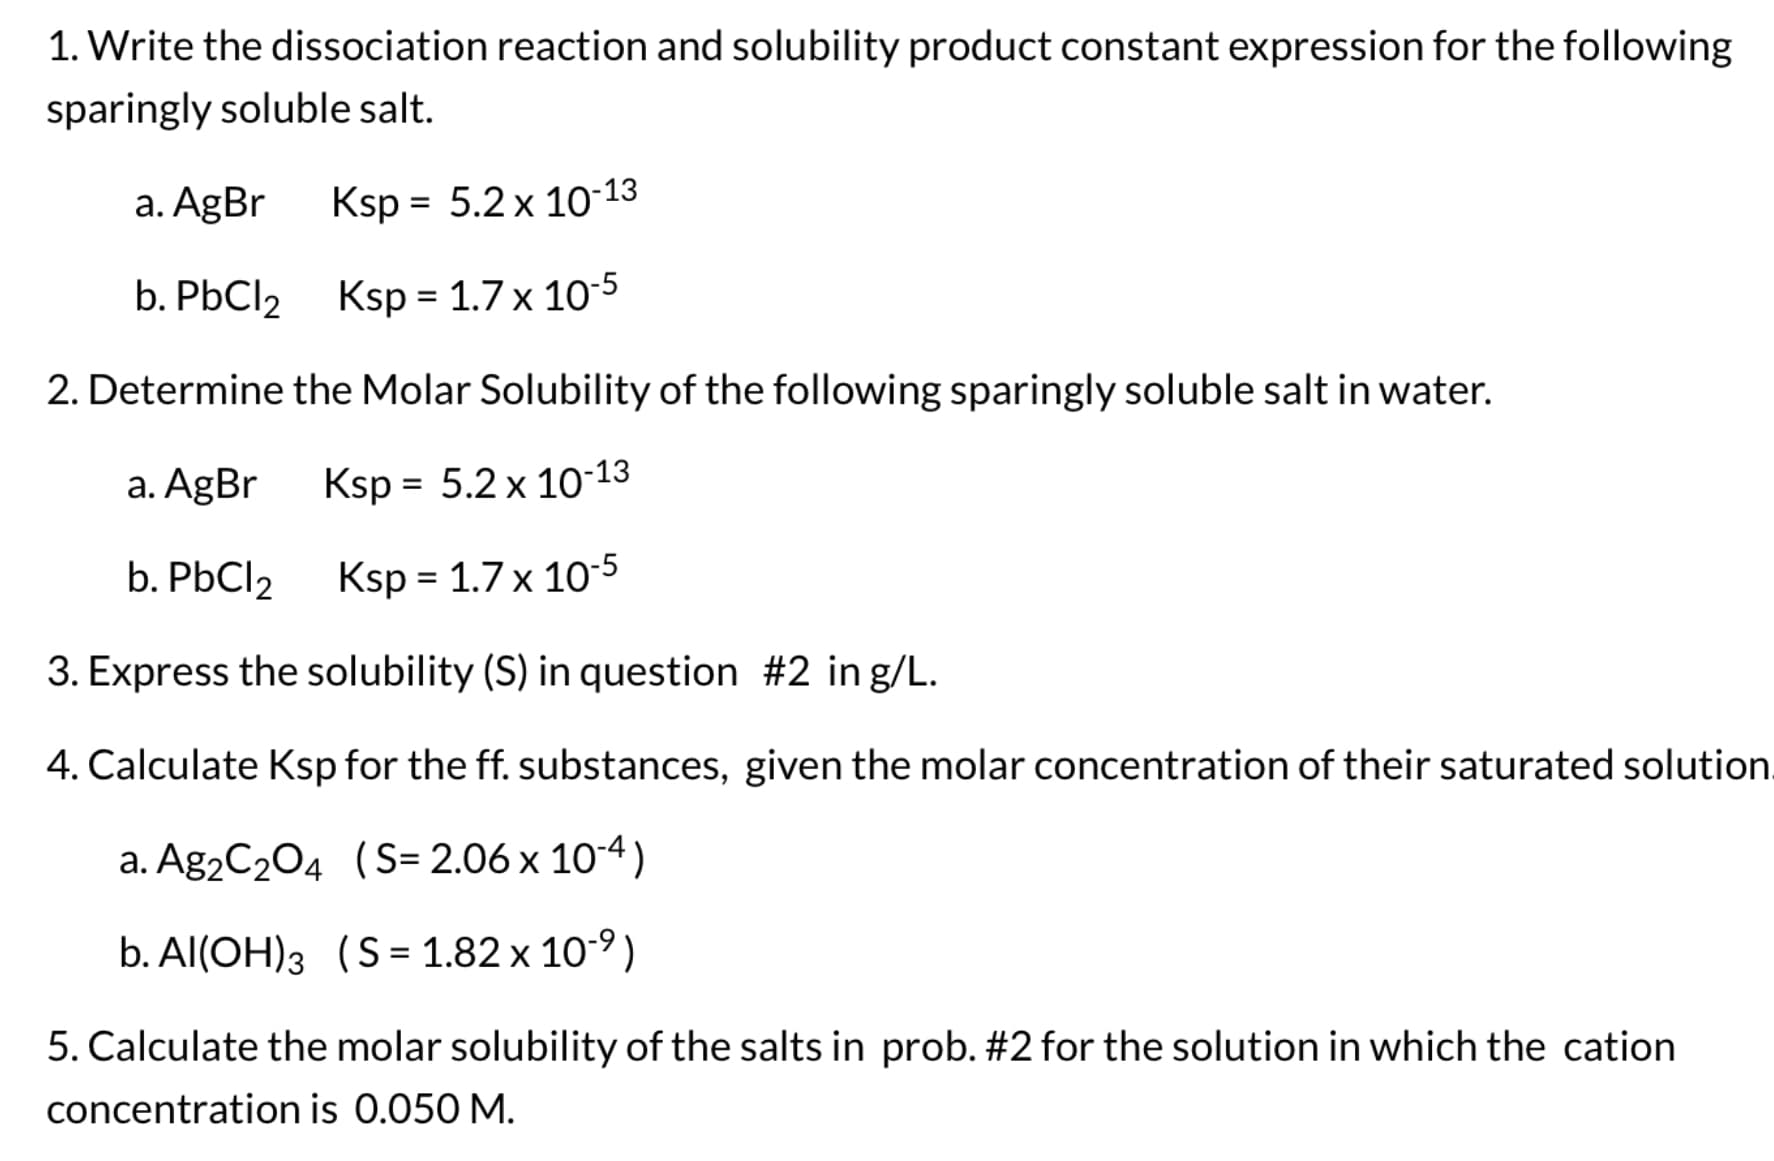 4. Calculate Ksp for the ff. substances, given the molar concentration of their saturated solution.
a. Ag2C204 (S= 2.06 x 10-4)
b. Al(OH)3 (S= 1.82 x 109)
